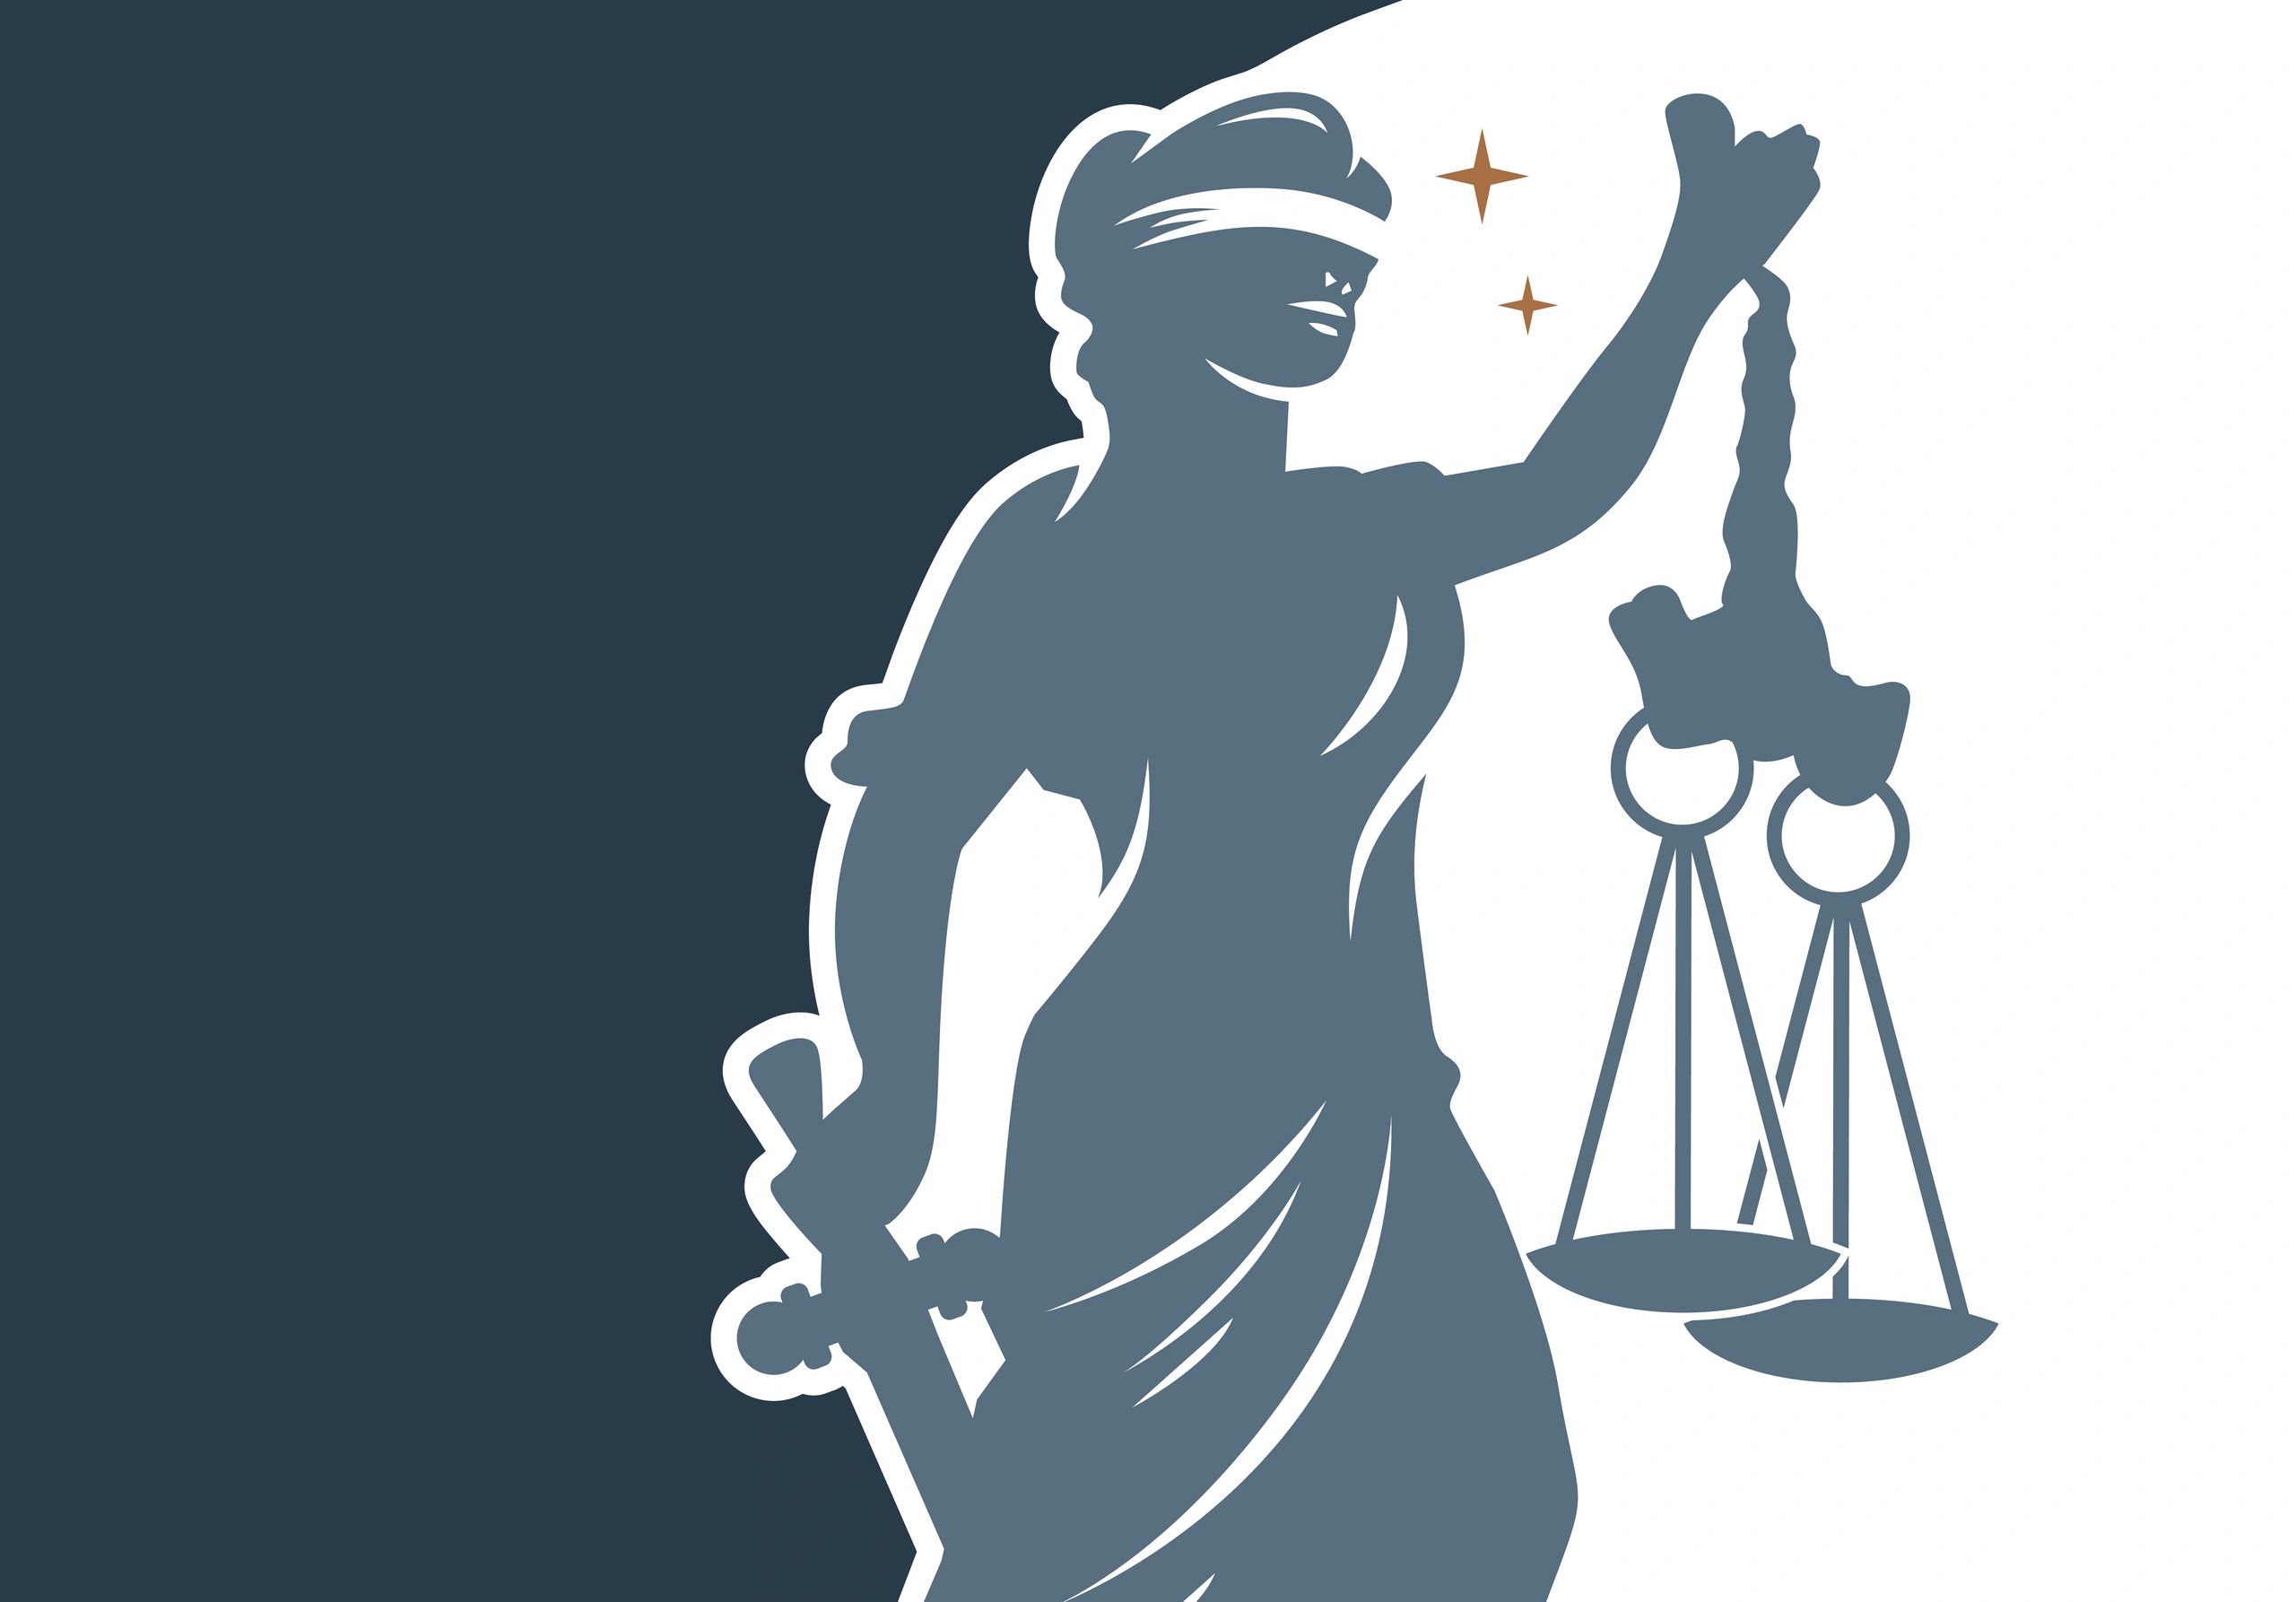 Lady Justice with balancing scales and a sword to serve her clients with honesty and fairness.